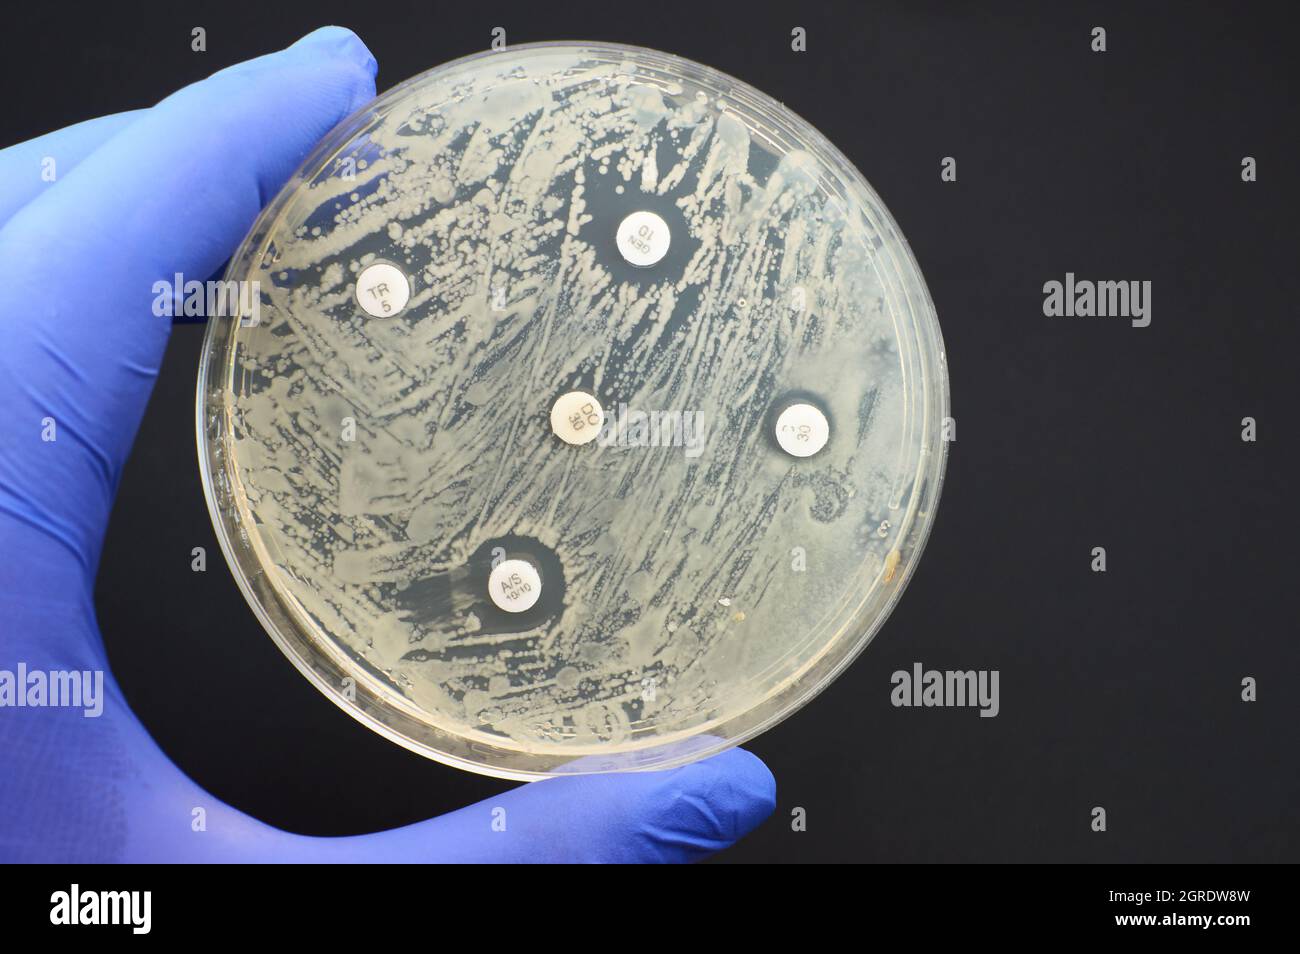 Detecting Antimicrobial Resistance By Kirby Bauer Diffusion Test Stock Photo